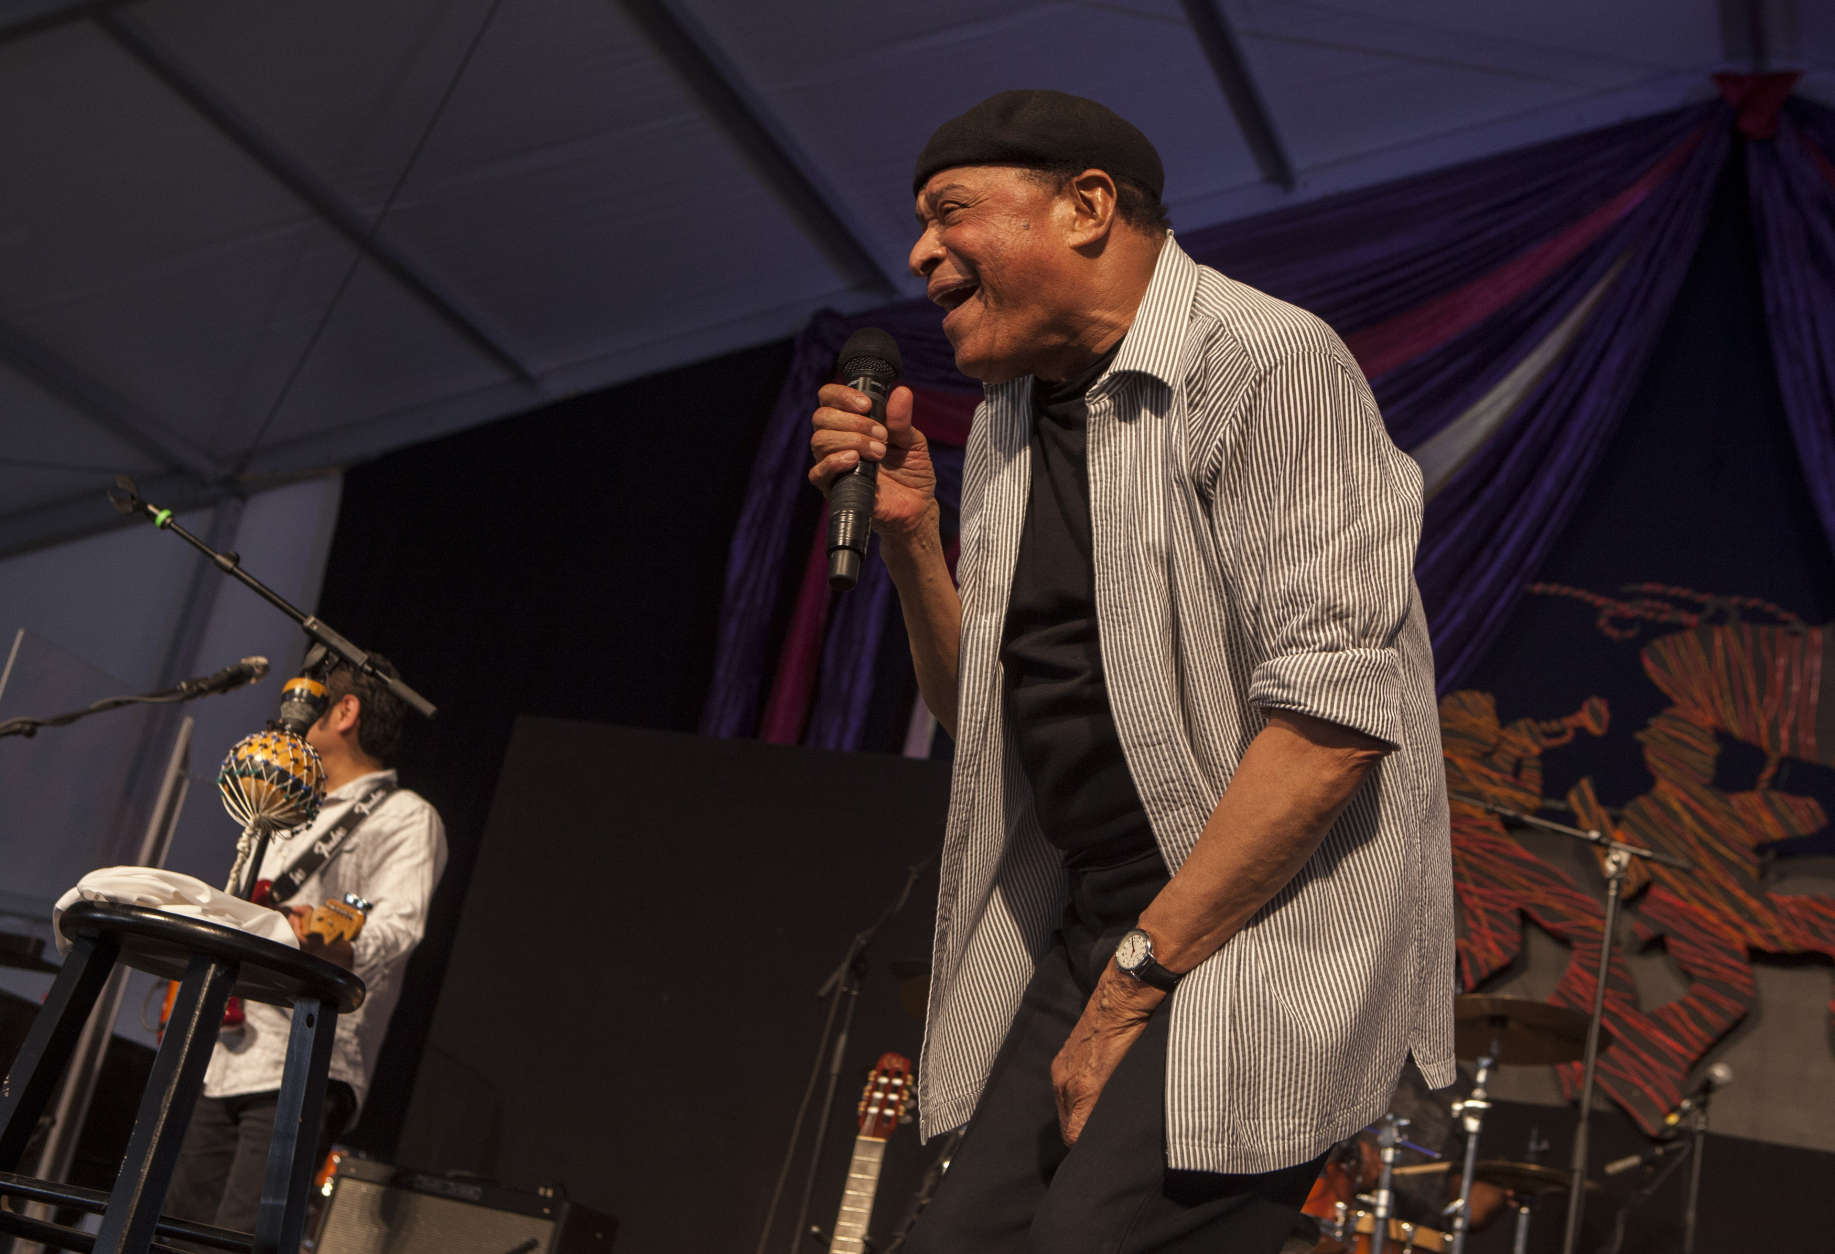 Al Jarreaus performs at the New Orleans Jazz and Heritage Festival in New Orleans on Saturday, May 3, 2014. (Photo by Barry Brecheisen/Invision/AP)